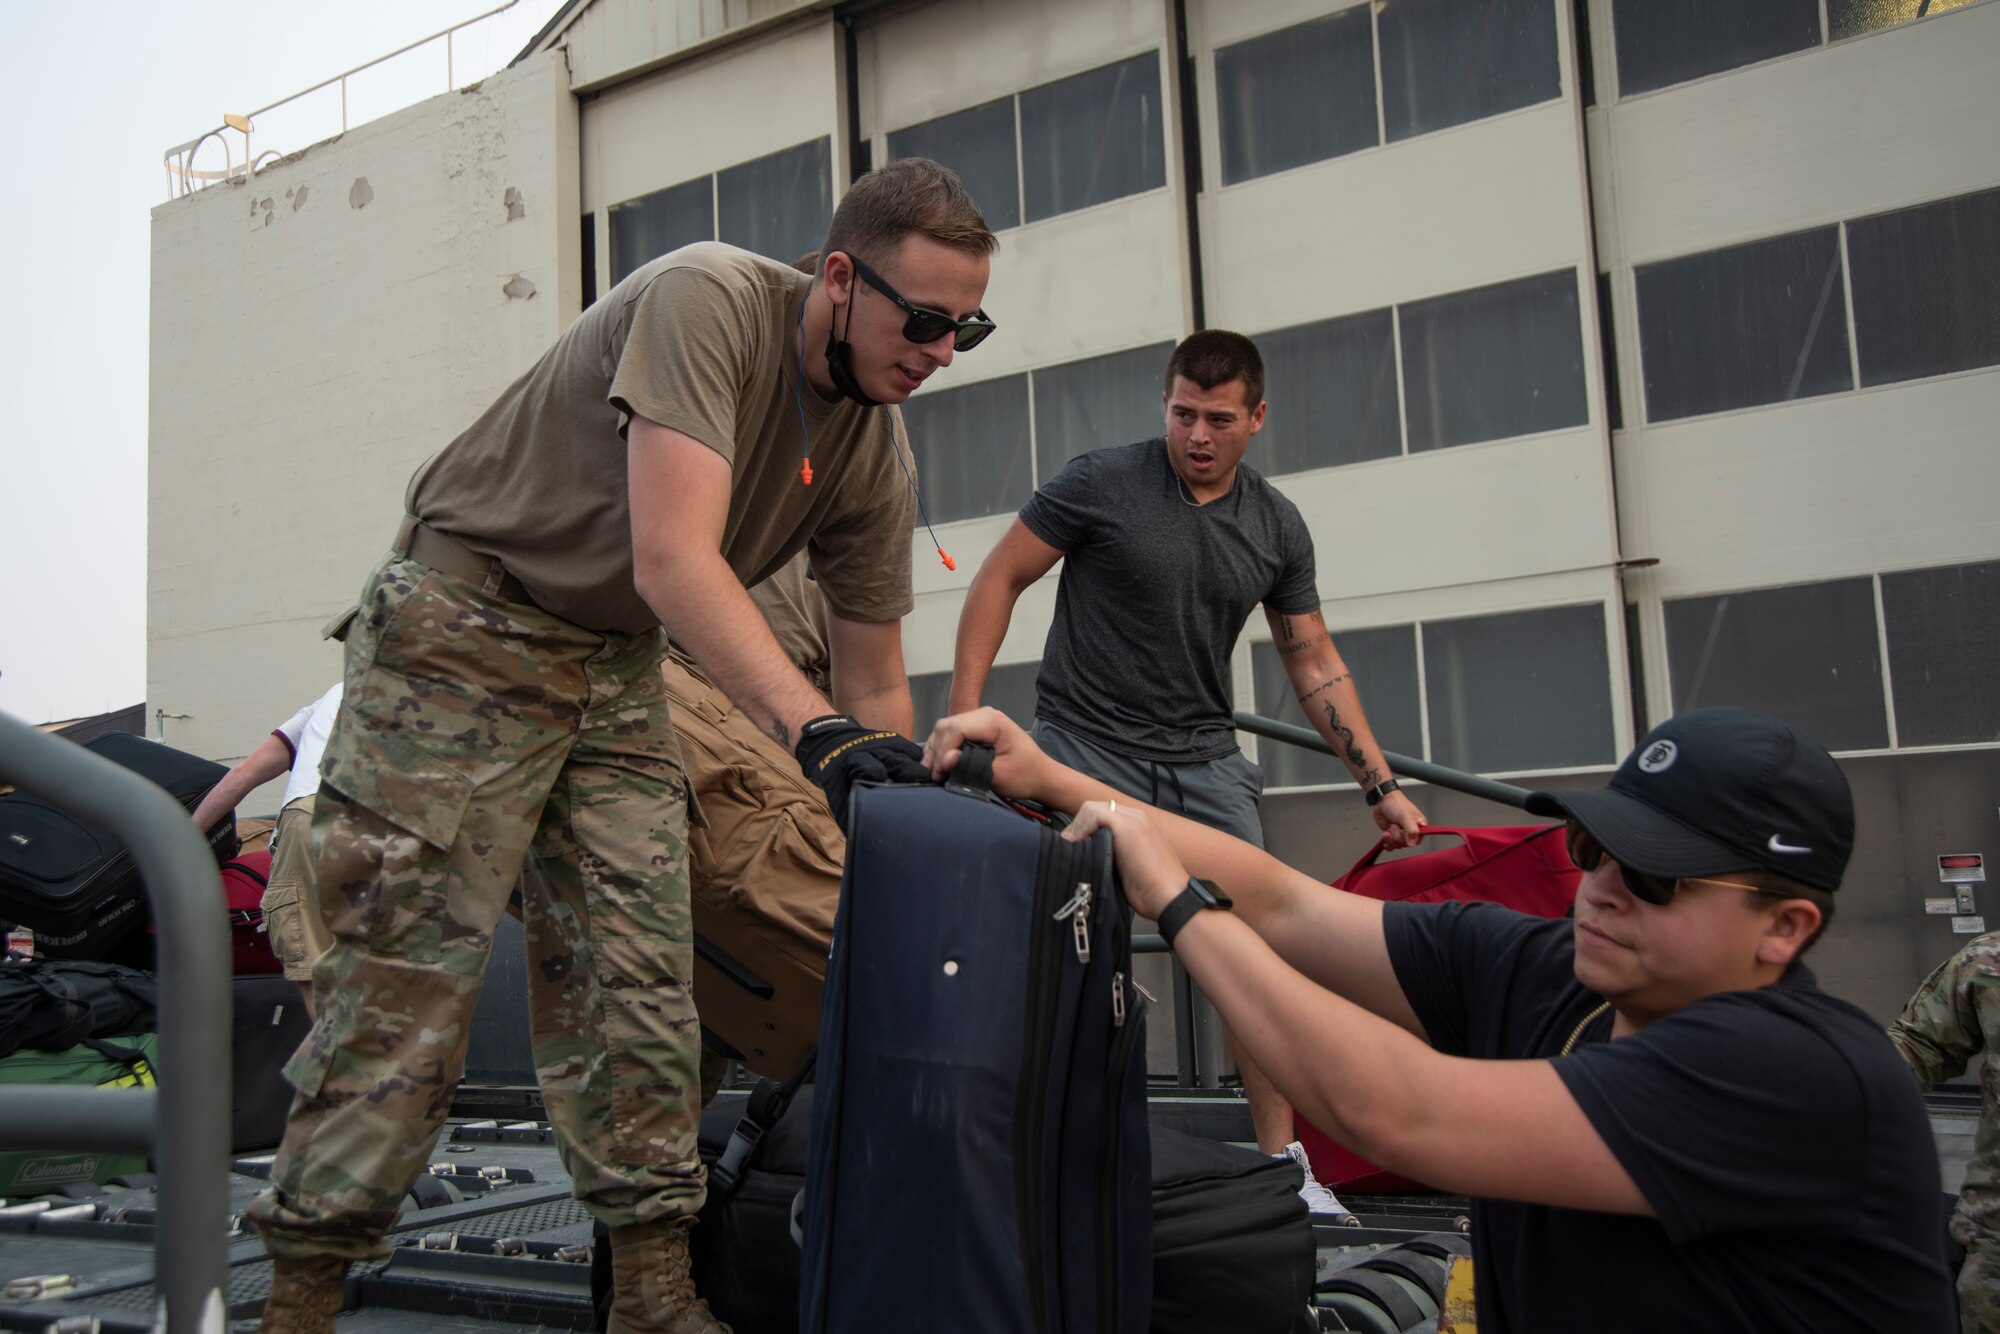 An Airman passes a traveling bag to another Airman in civilian clothing who has returned from deployment.